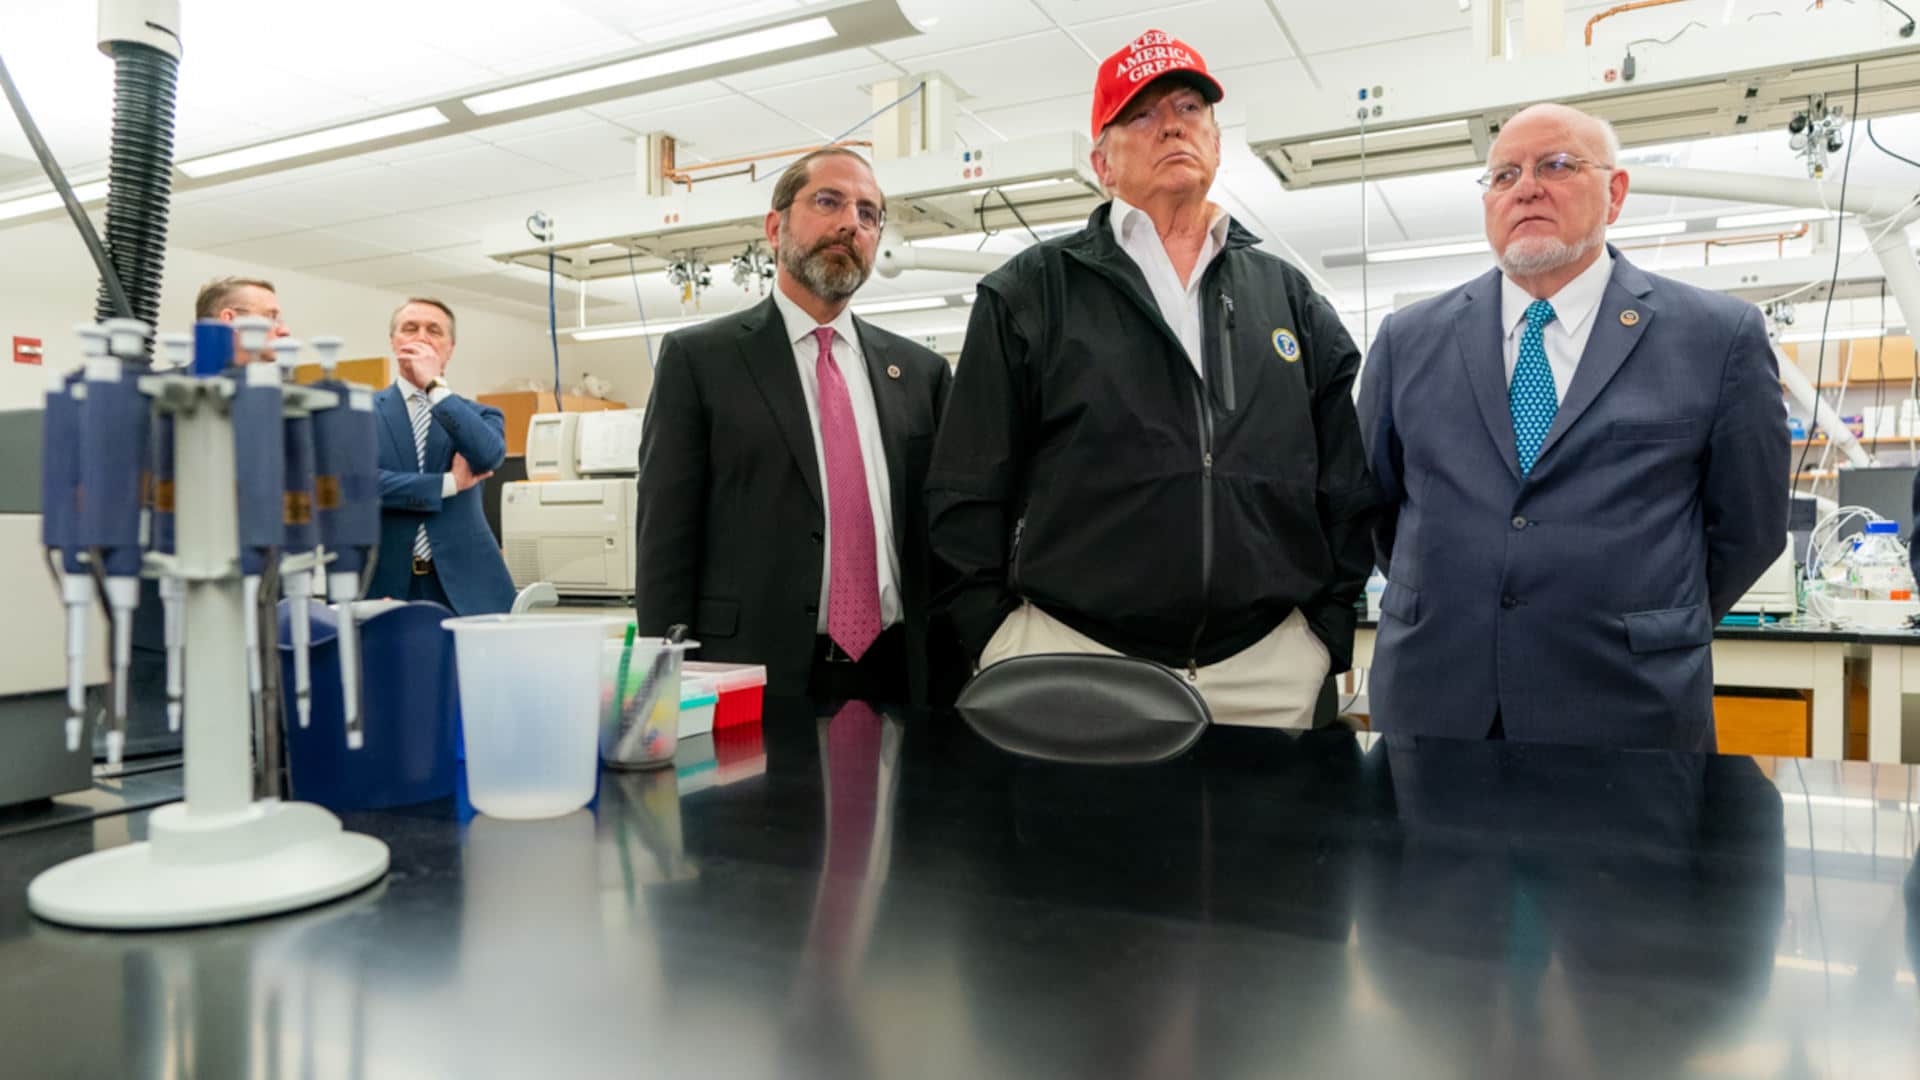 President Trump stands with Robert Redfield, director of the Centers for Disease Control and Prevention, and Secretary of Health and Human Services Alex Azar, at a visit to the CDC's Atlanta headquarters on March 6, 2020.